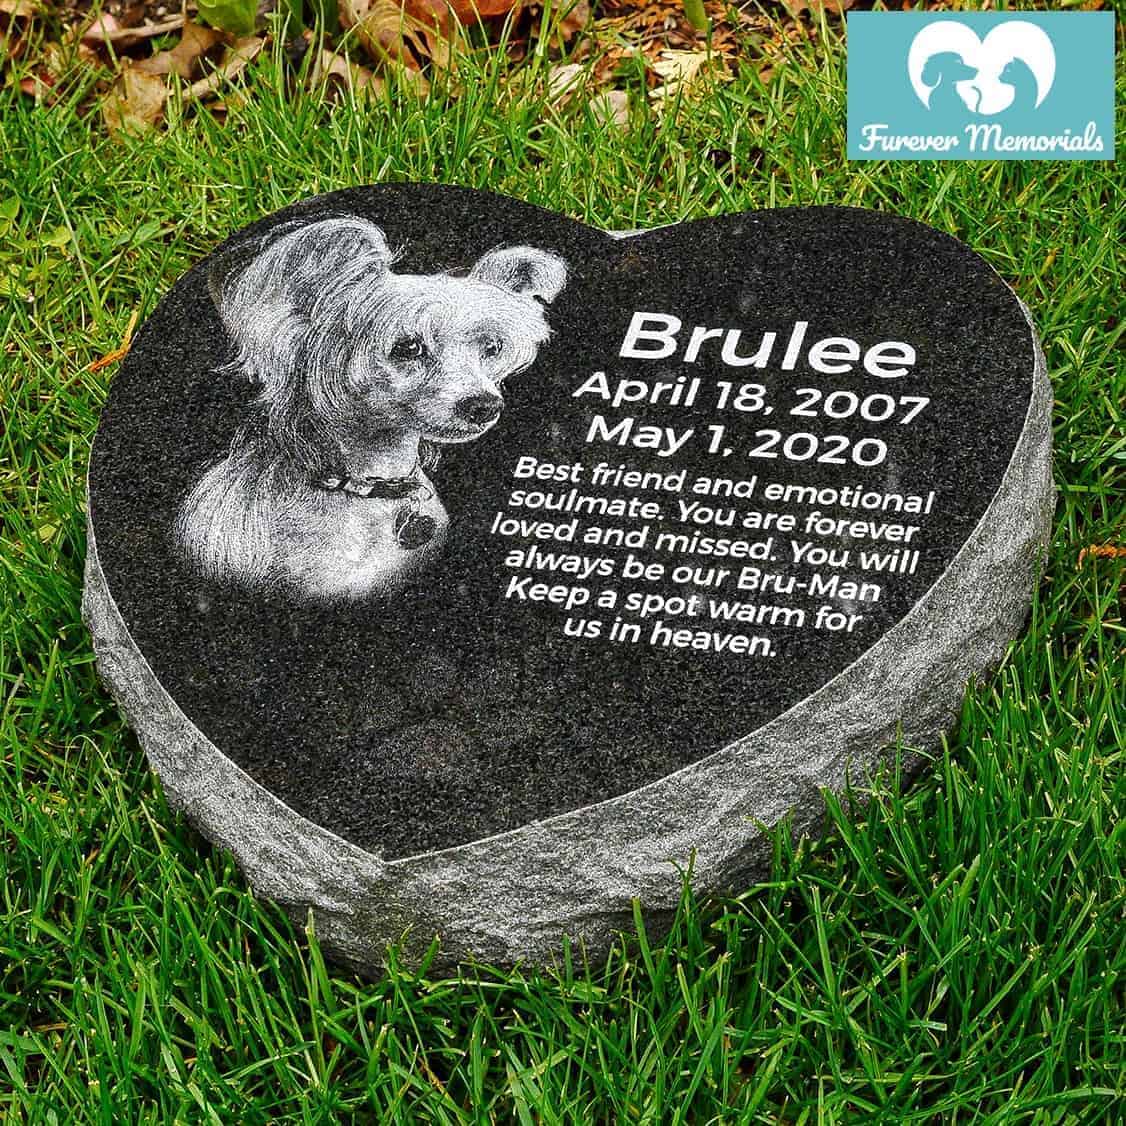 trusted journey pet memorial services